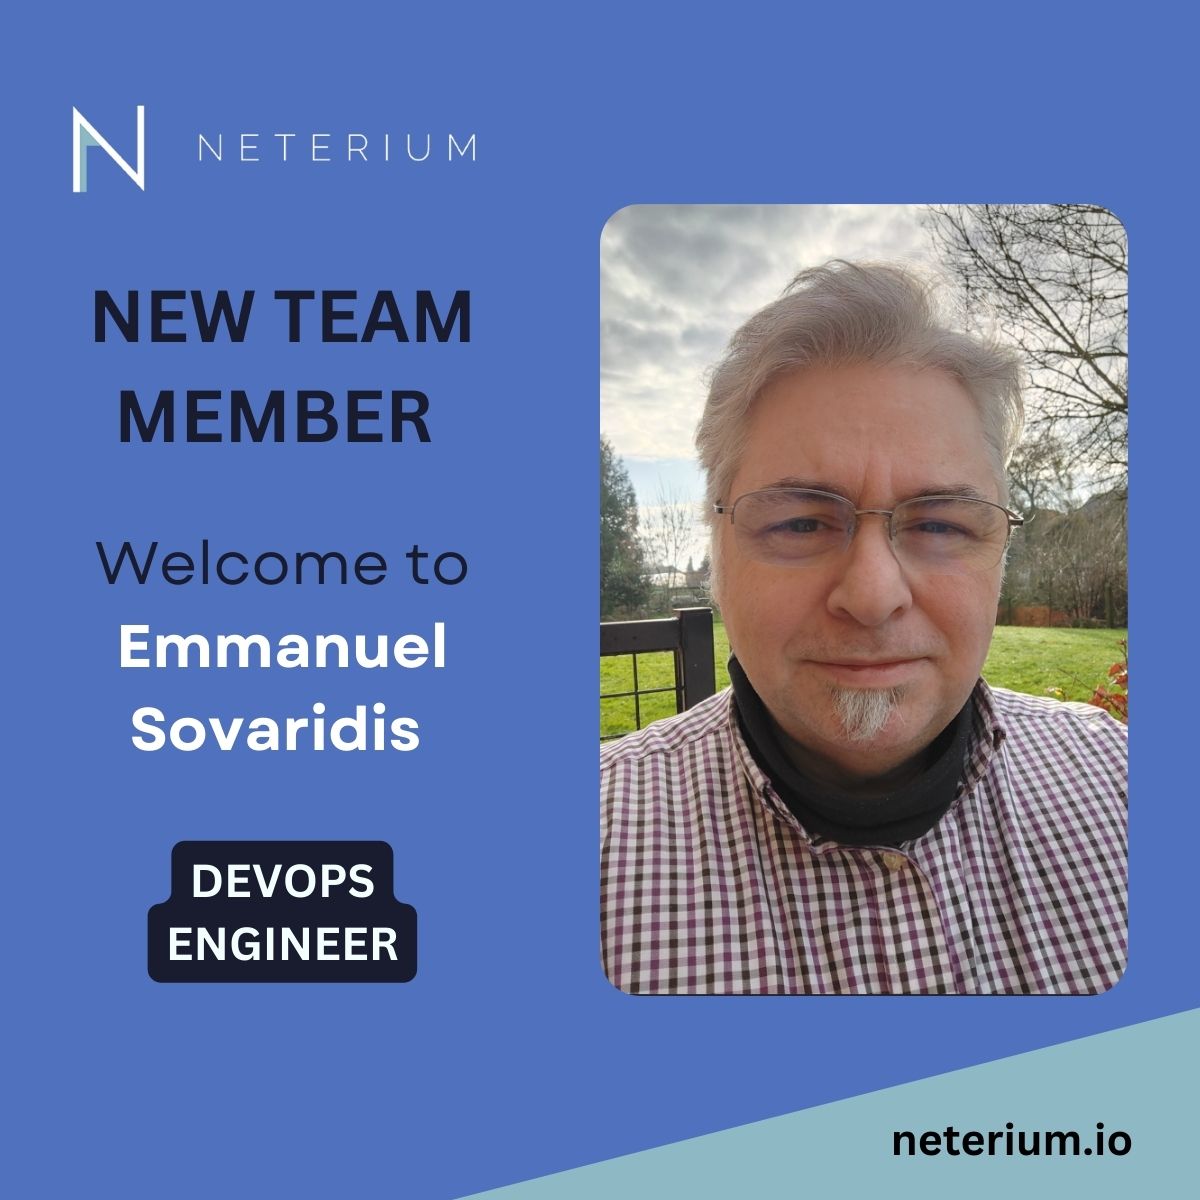 #WeAreGrowing  
 
Thrilled to announce that Emmanuel Sovaridis has joined our #Neterium team as #DevOps Engineer
 
Emmanuel is a seasoned professional with a strong #IT background and multi-platform skills. 

He has proven track-record of supporting mission-critical services.